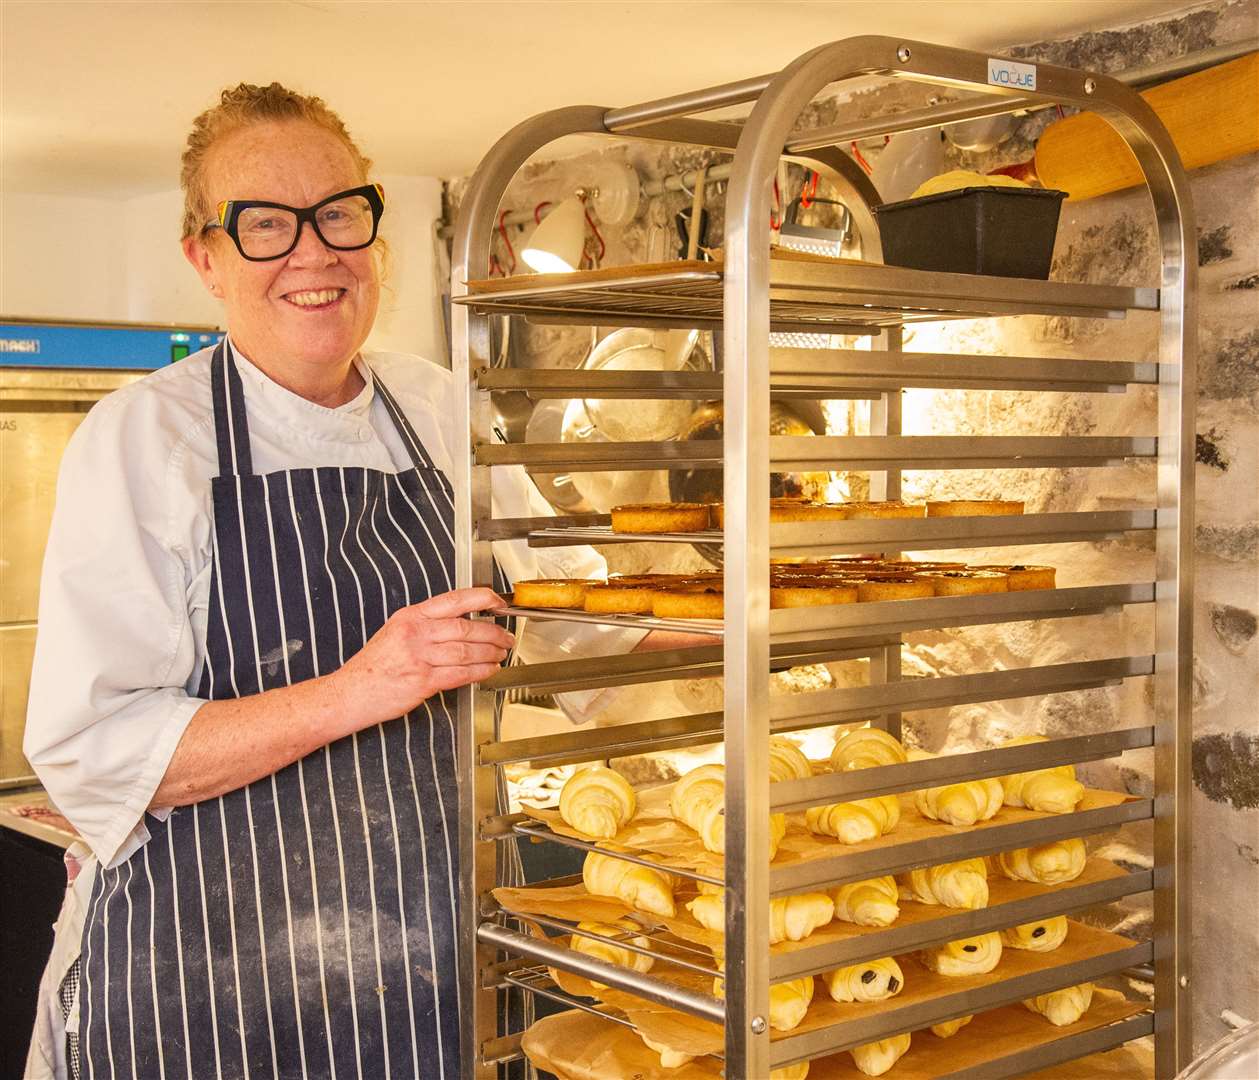 A variety of treats are baked by Anne Keenan at the Honestly Bakehouse in the Square. Picture: Daniel Forsyth.